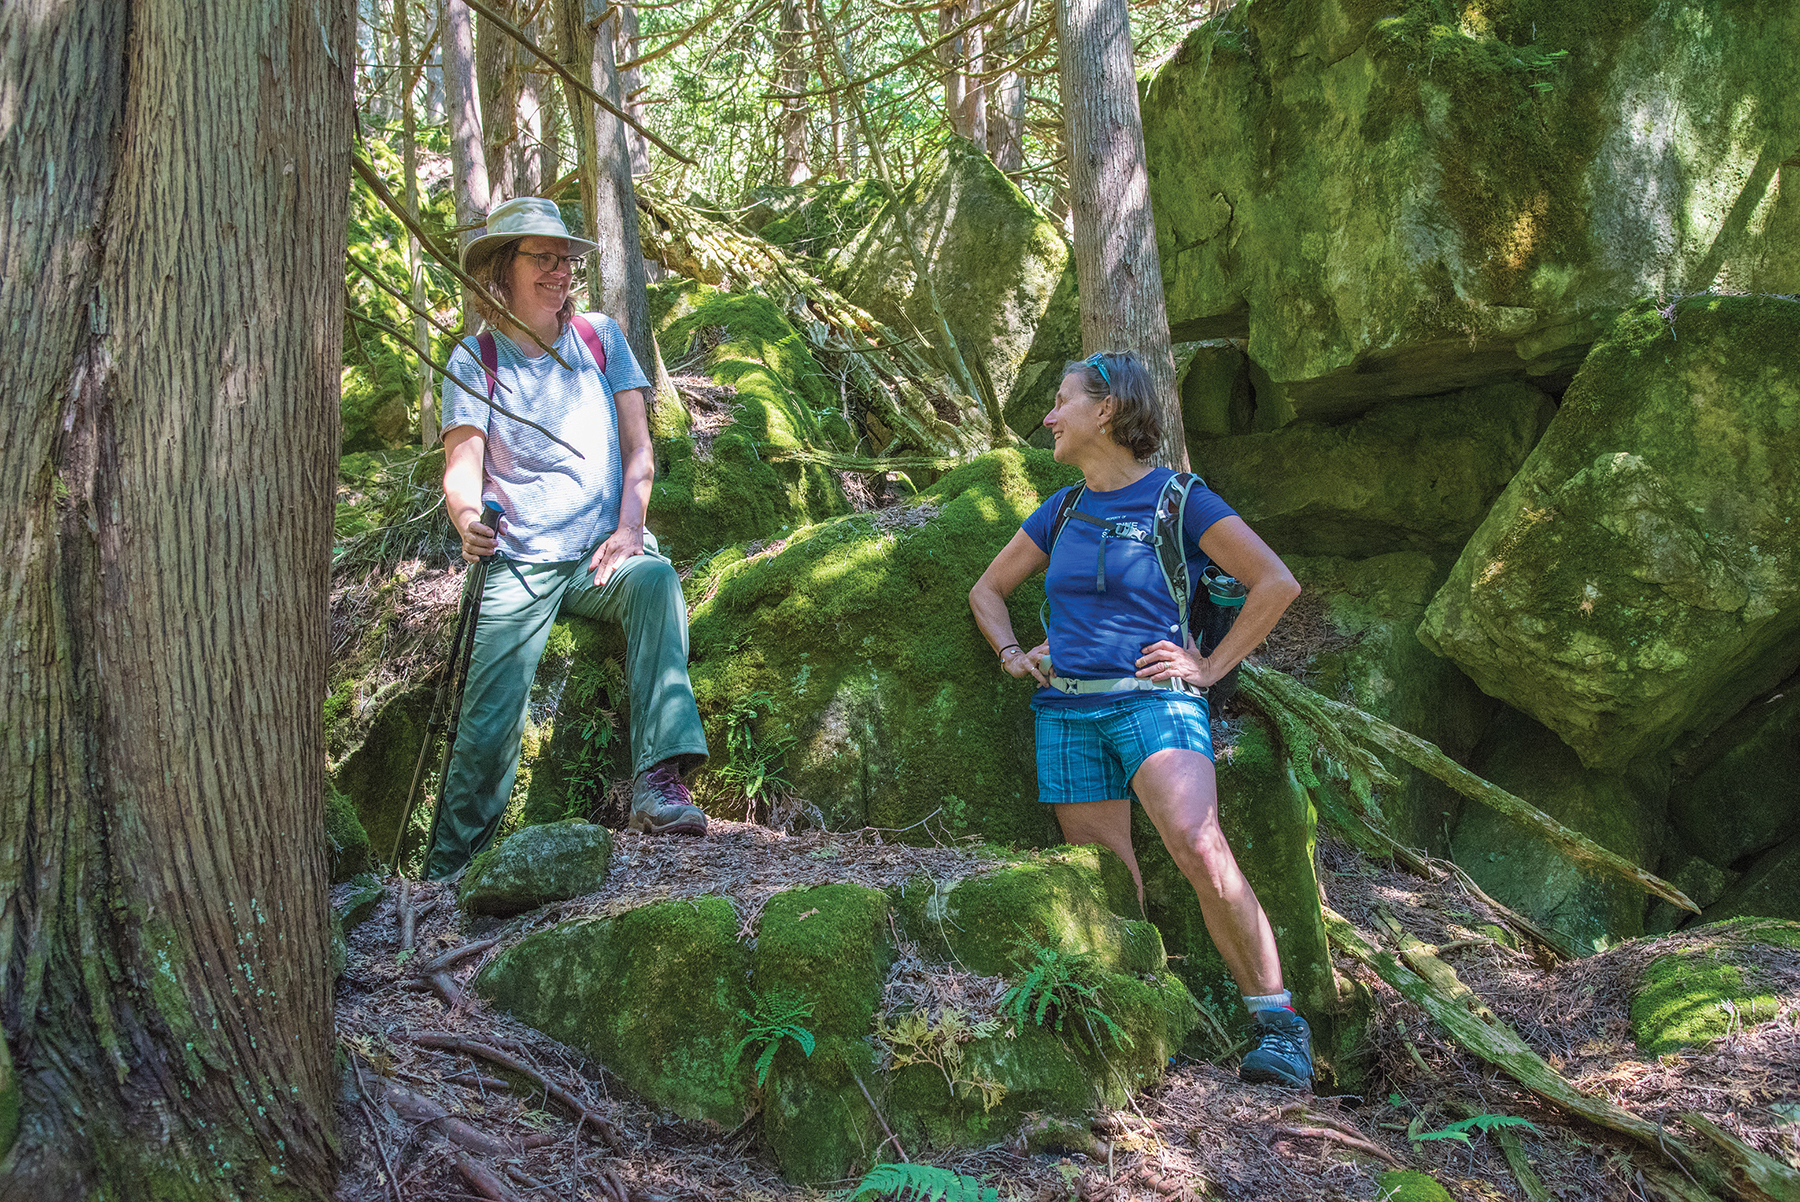 As pockets of cold air waft up from the crevices, Leslie Piercey and Shanna Reid cool off amidst the mossy rocks of a massive boulder field on the Silent Valley Trail.